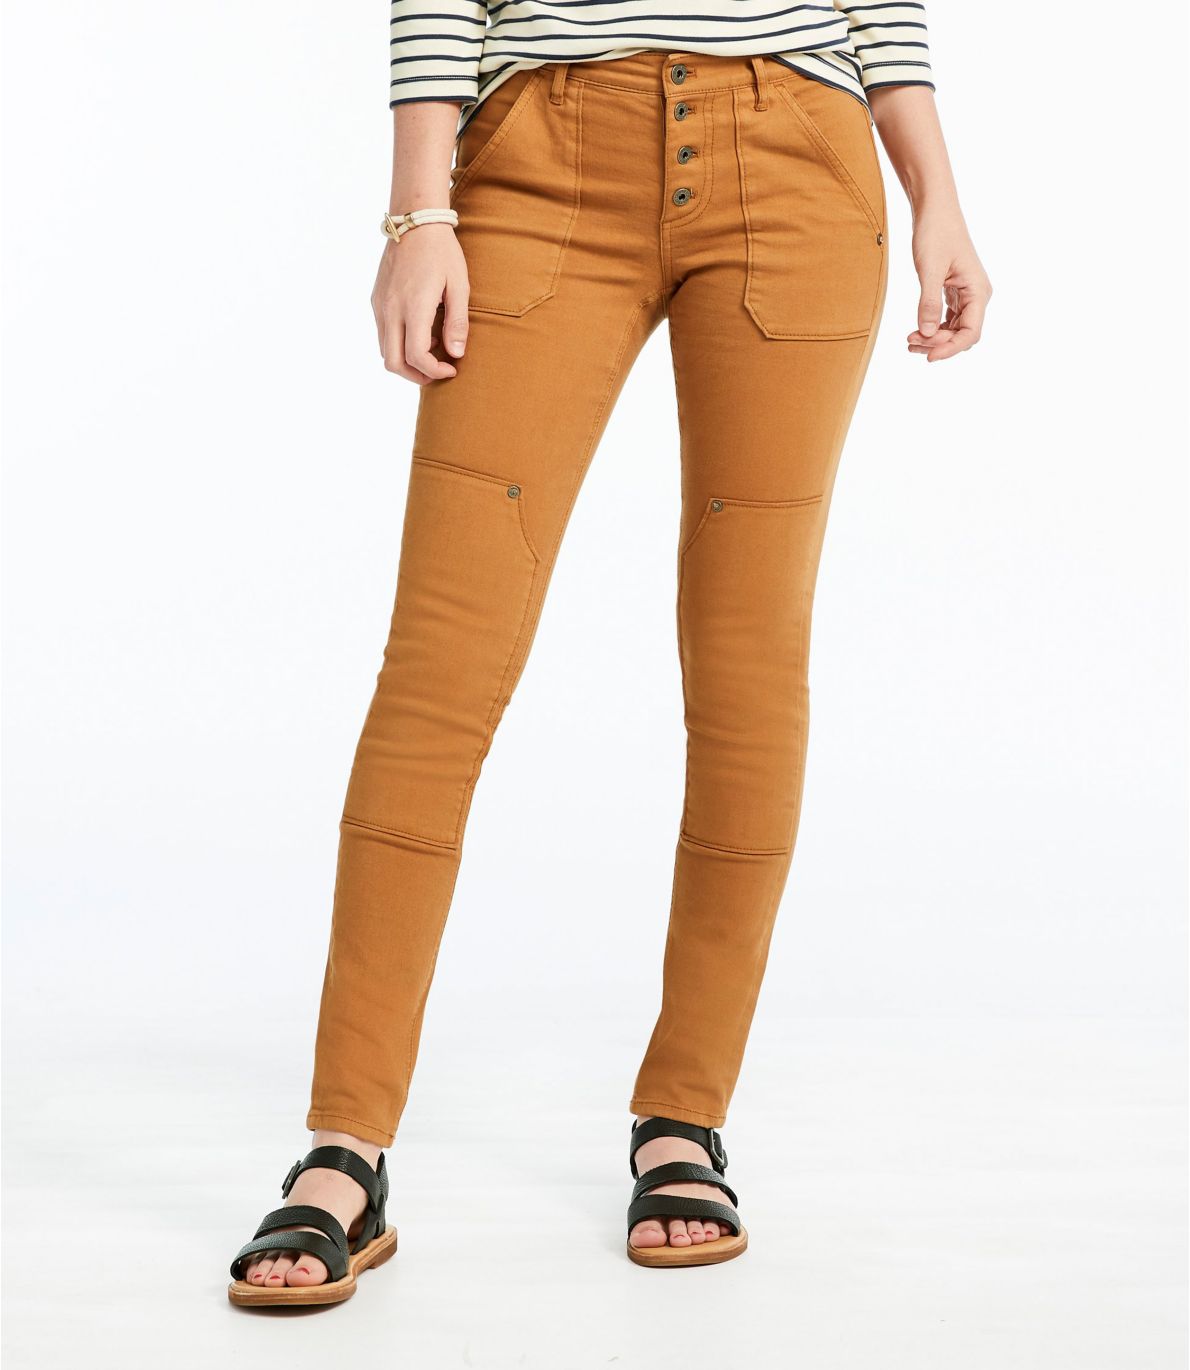 Women's Signature Premium Skinny Jeans, Button-Front Ankle